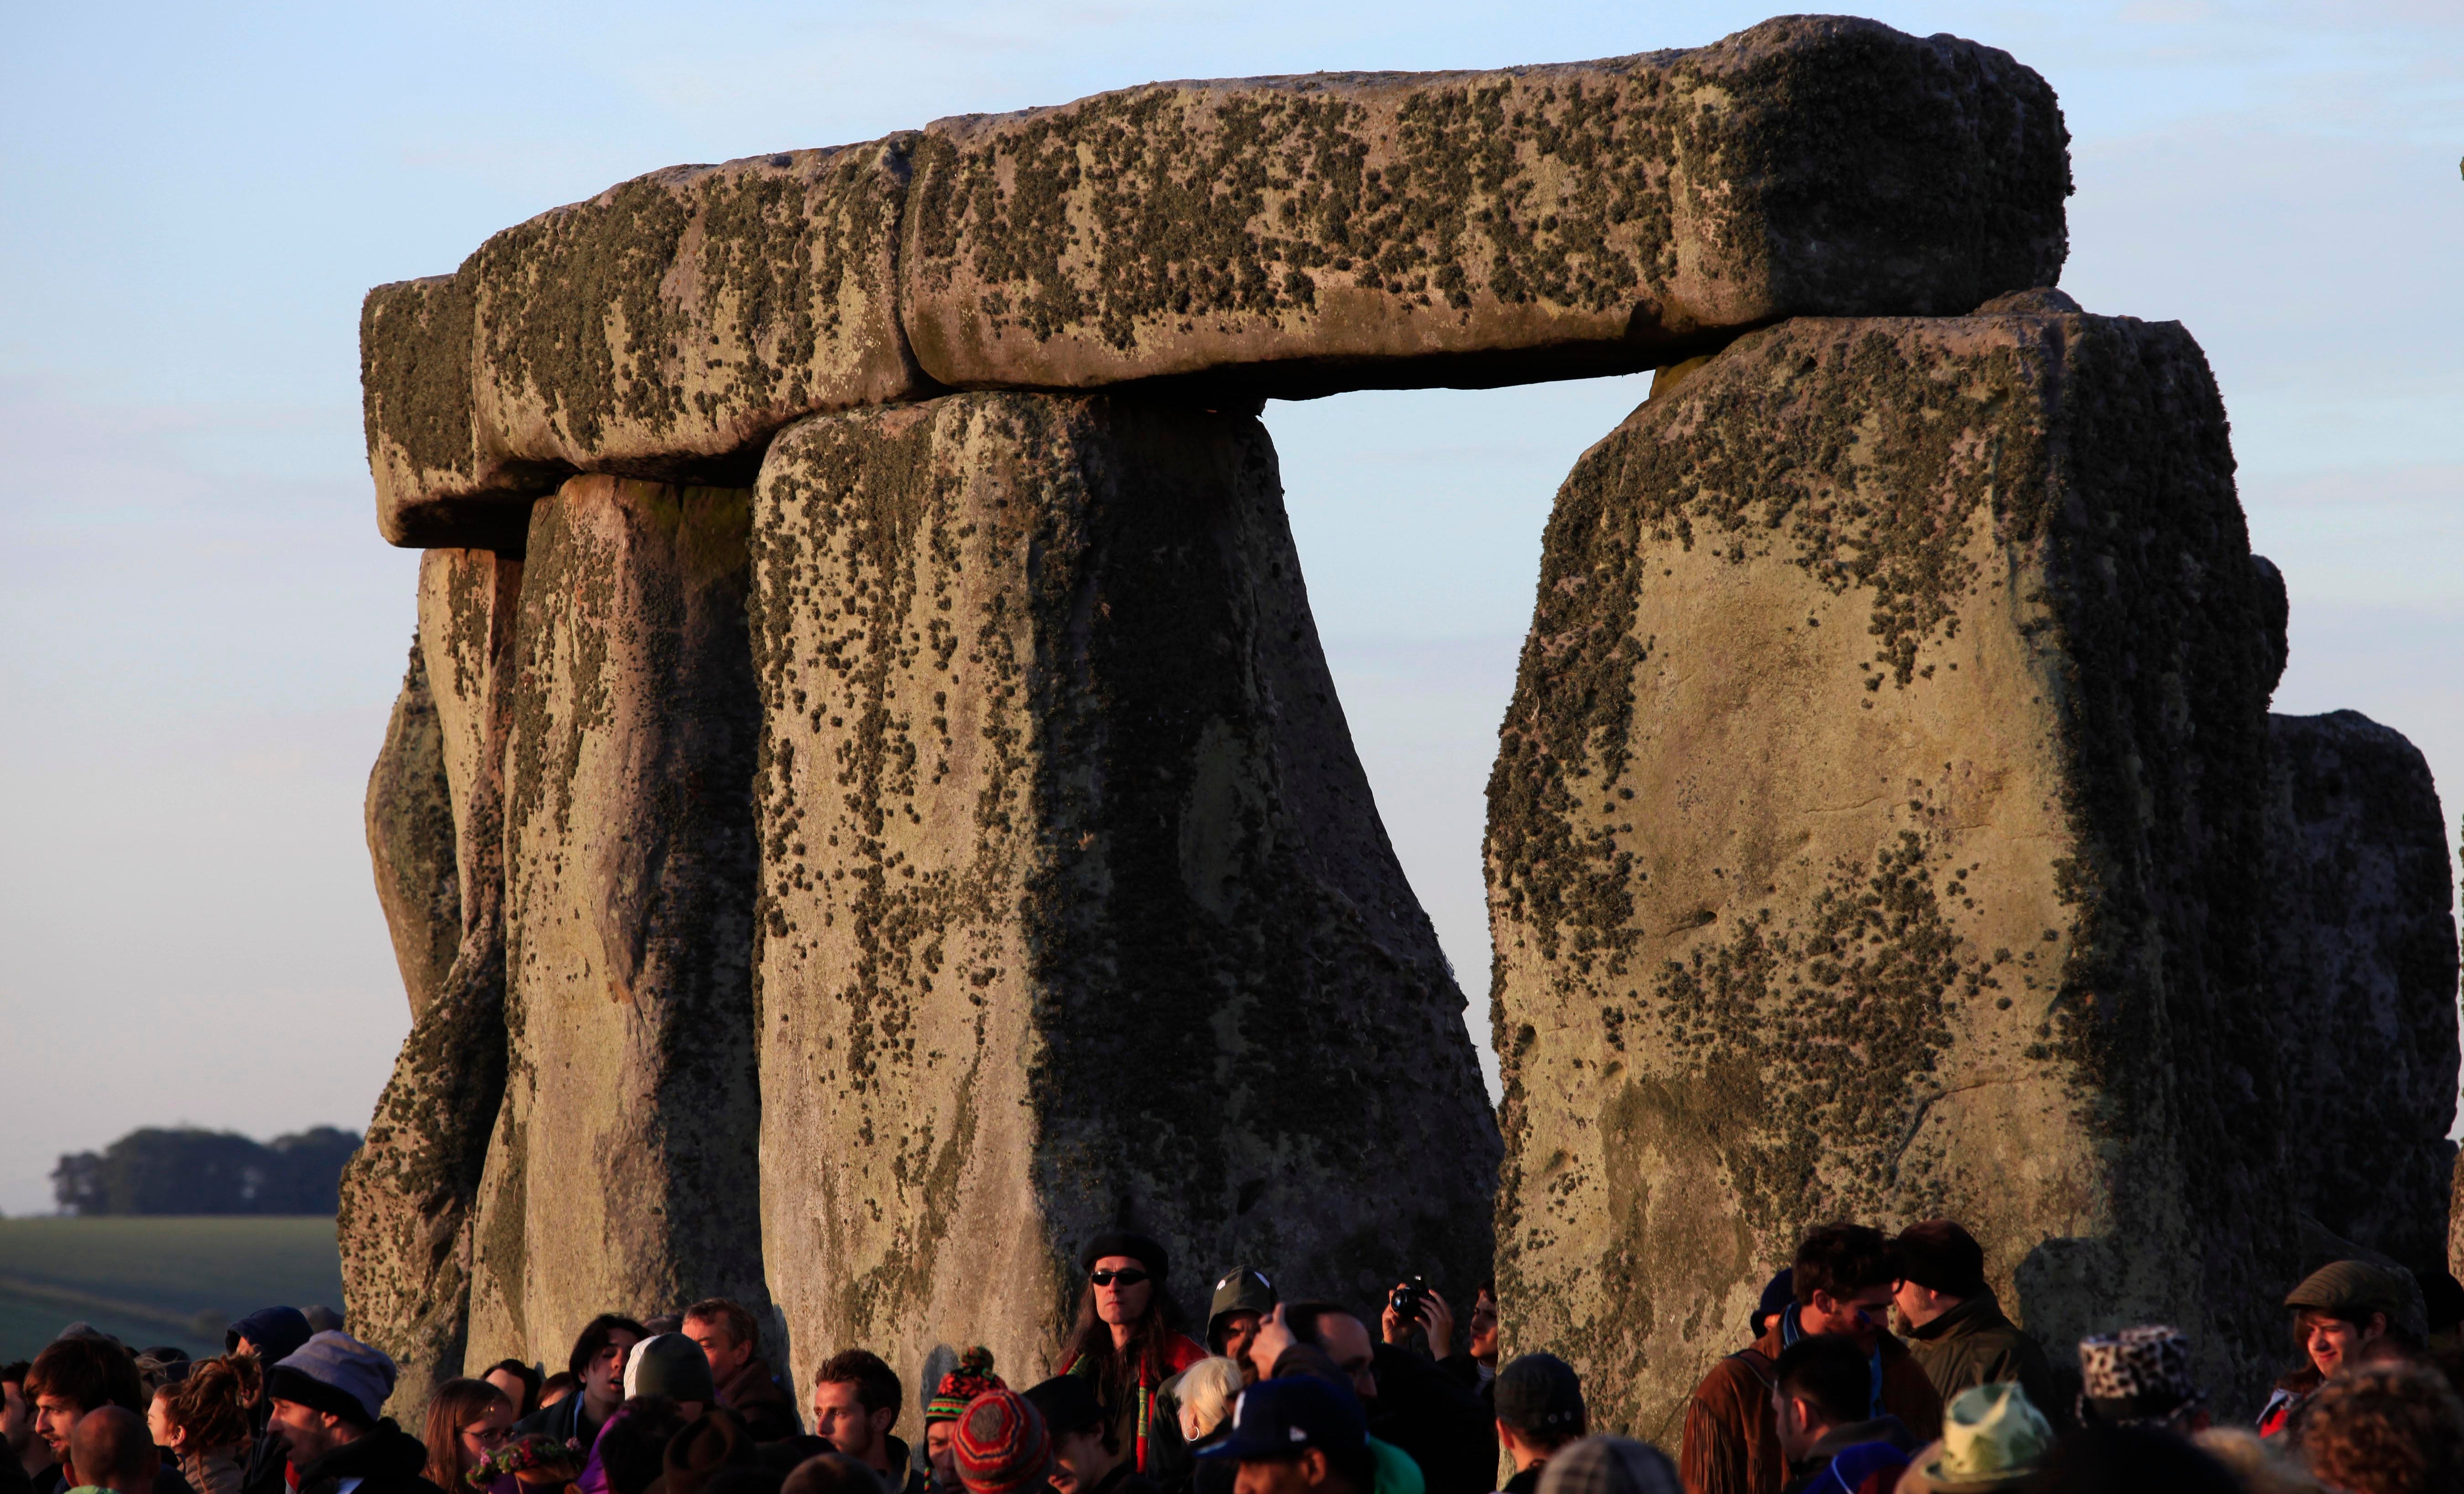 If Stonehenge Is Actually a Giant Instrument, What Does It Sound Like?